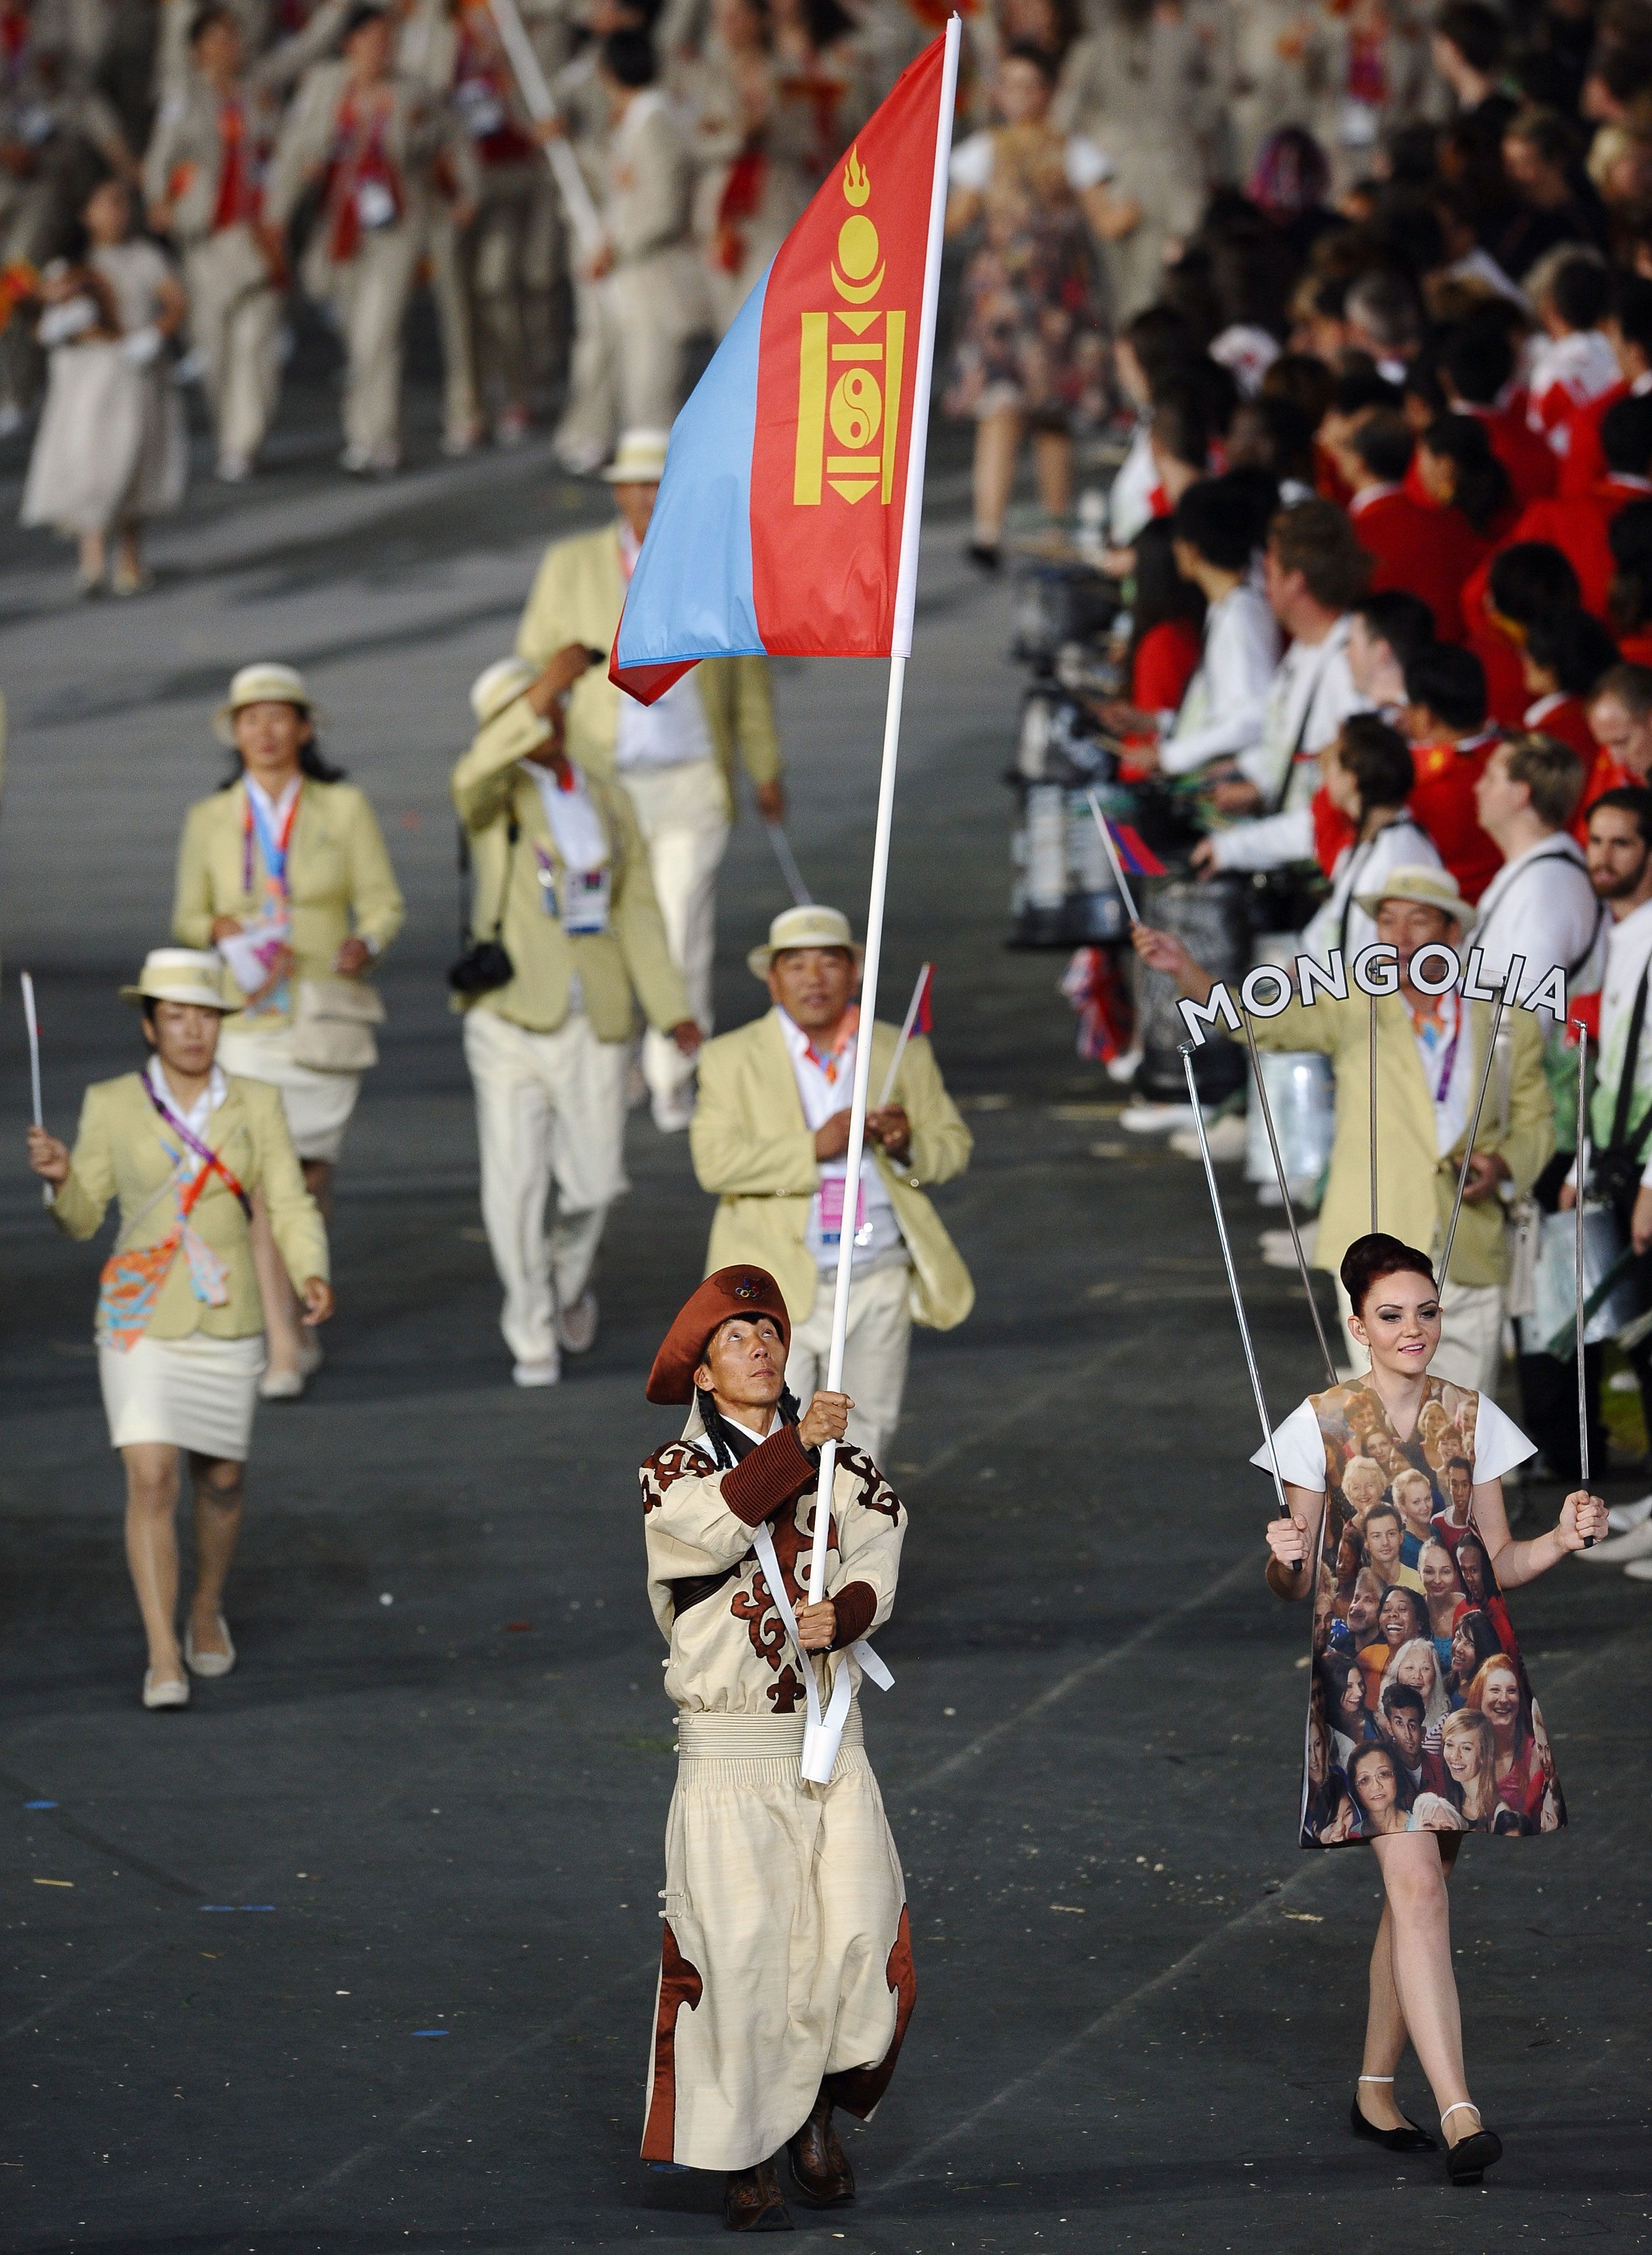 Mongolia's Ser-Od Bat-Ochir carries his country's flag at the opening ceremony of the 2012 Olympic Games in London